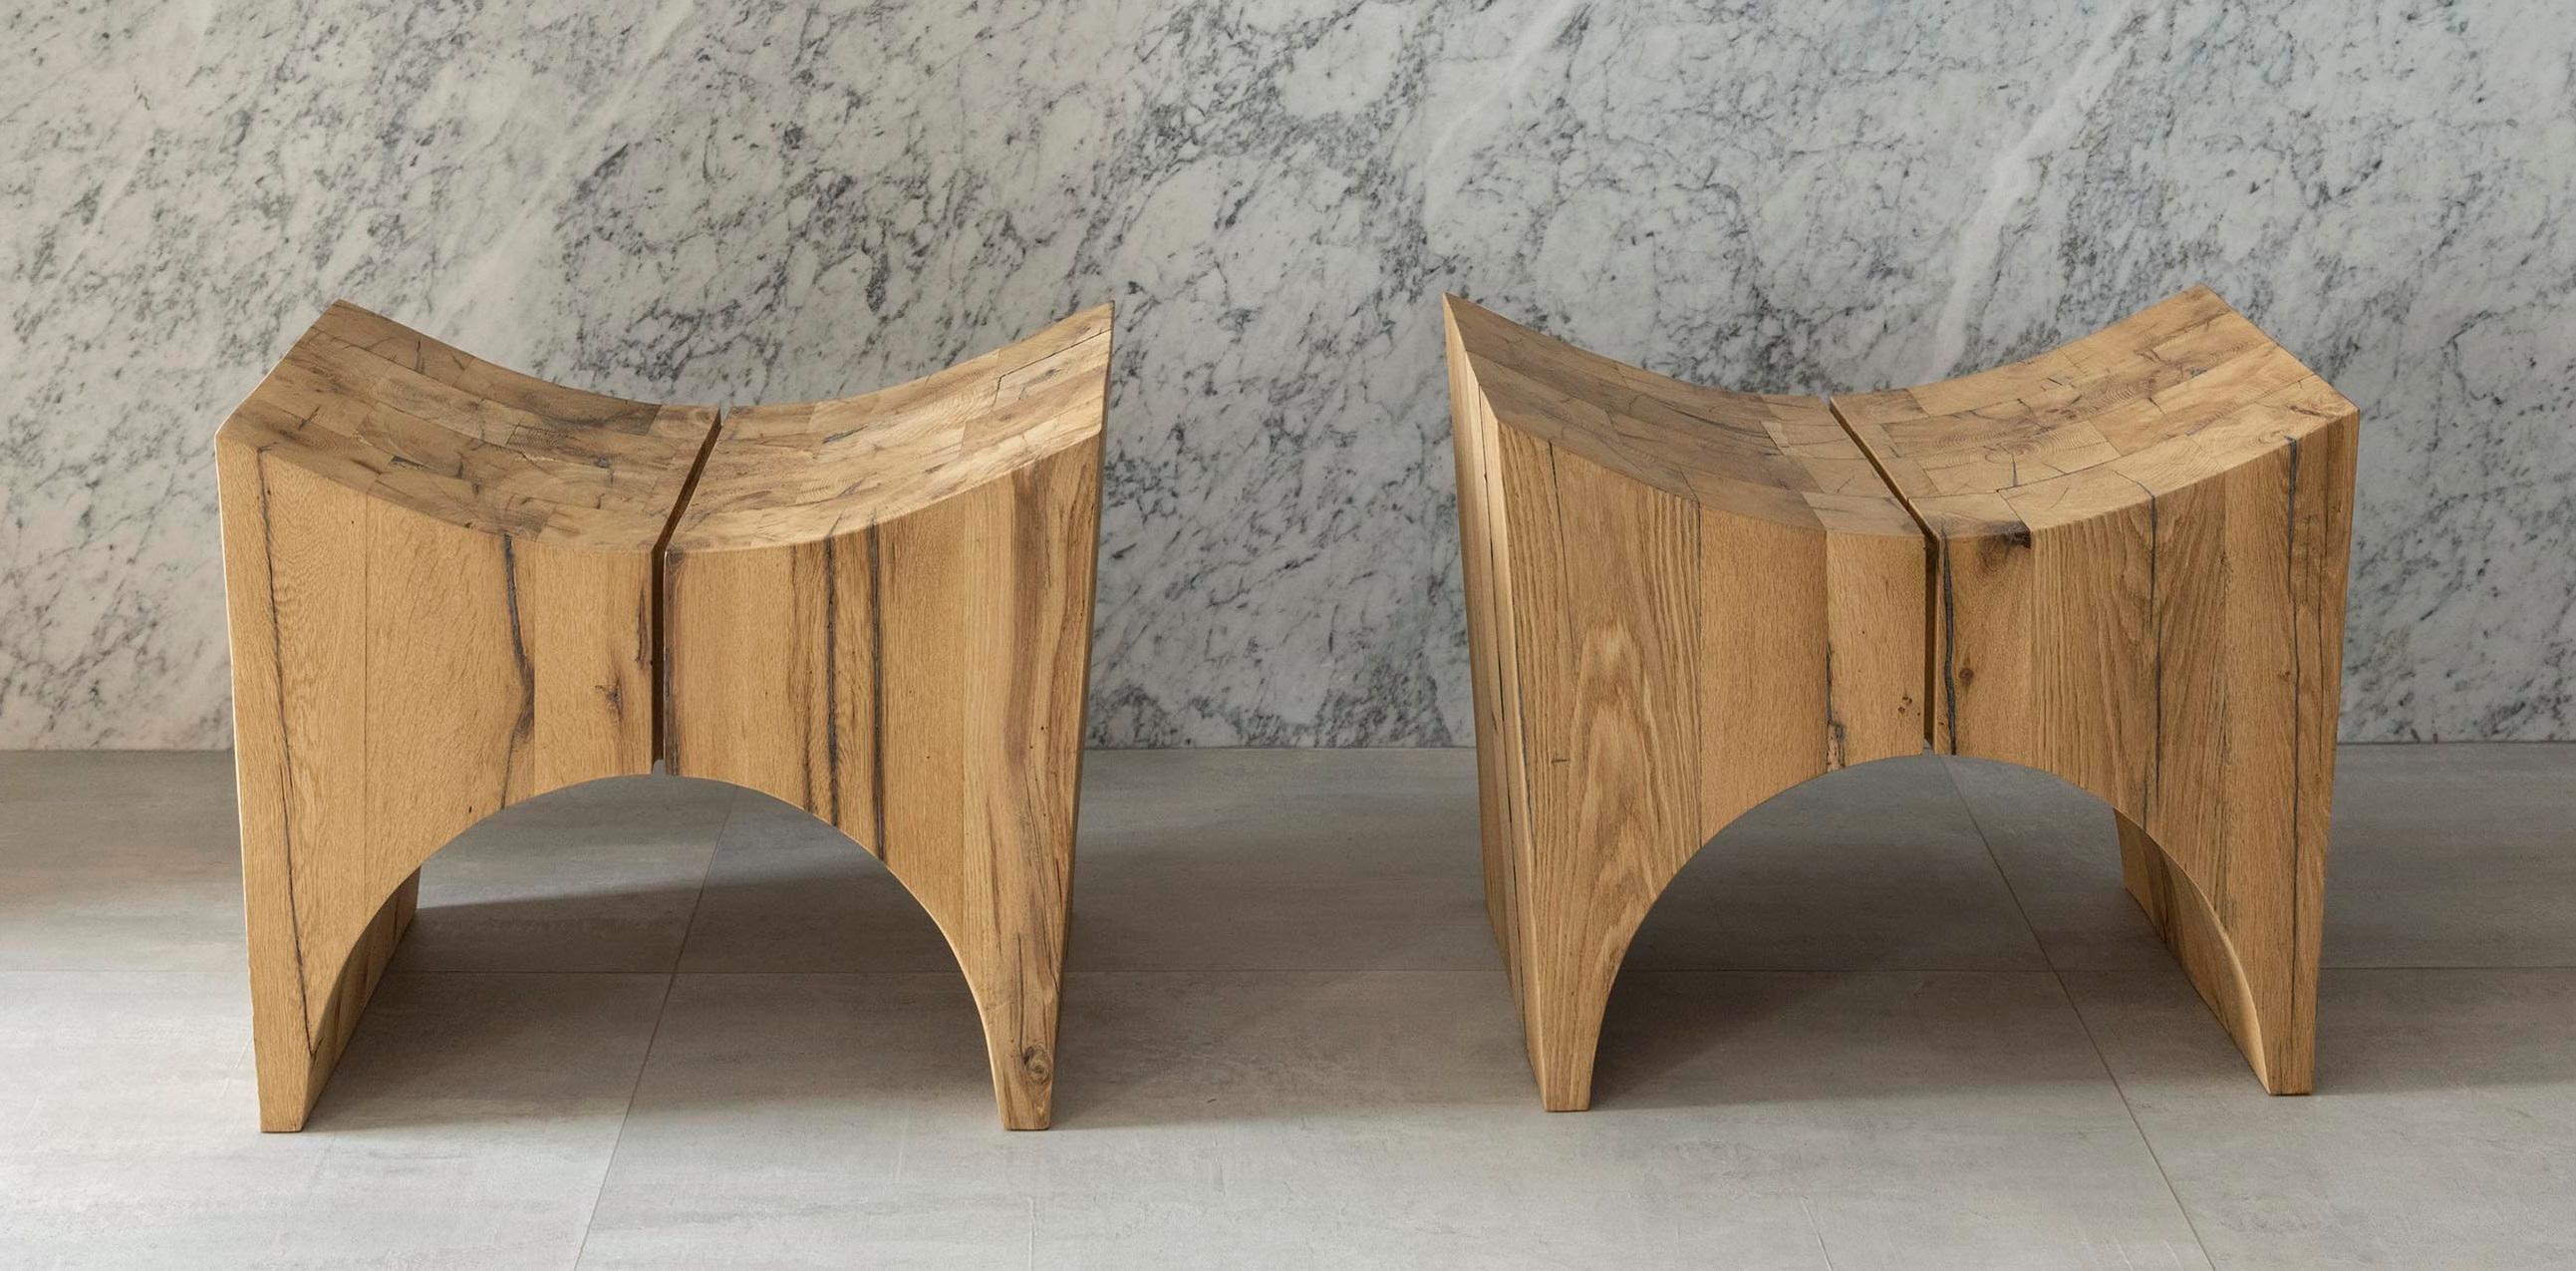 Set Of 2 W Oak Stools by Nana Zaalishvili
Dimensions: D 30 x W 55 x H 45 cm.
Materials: Solid oak.

Made in century old oak wood, W stool serve as an easy and comfortable seating for the spaces with the different function. Massive volume of the W